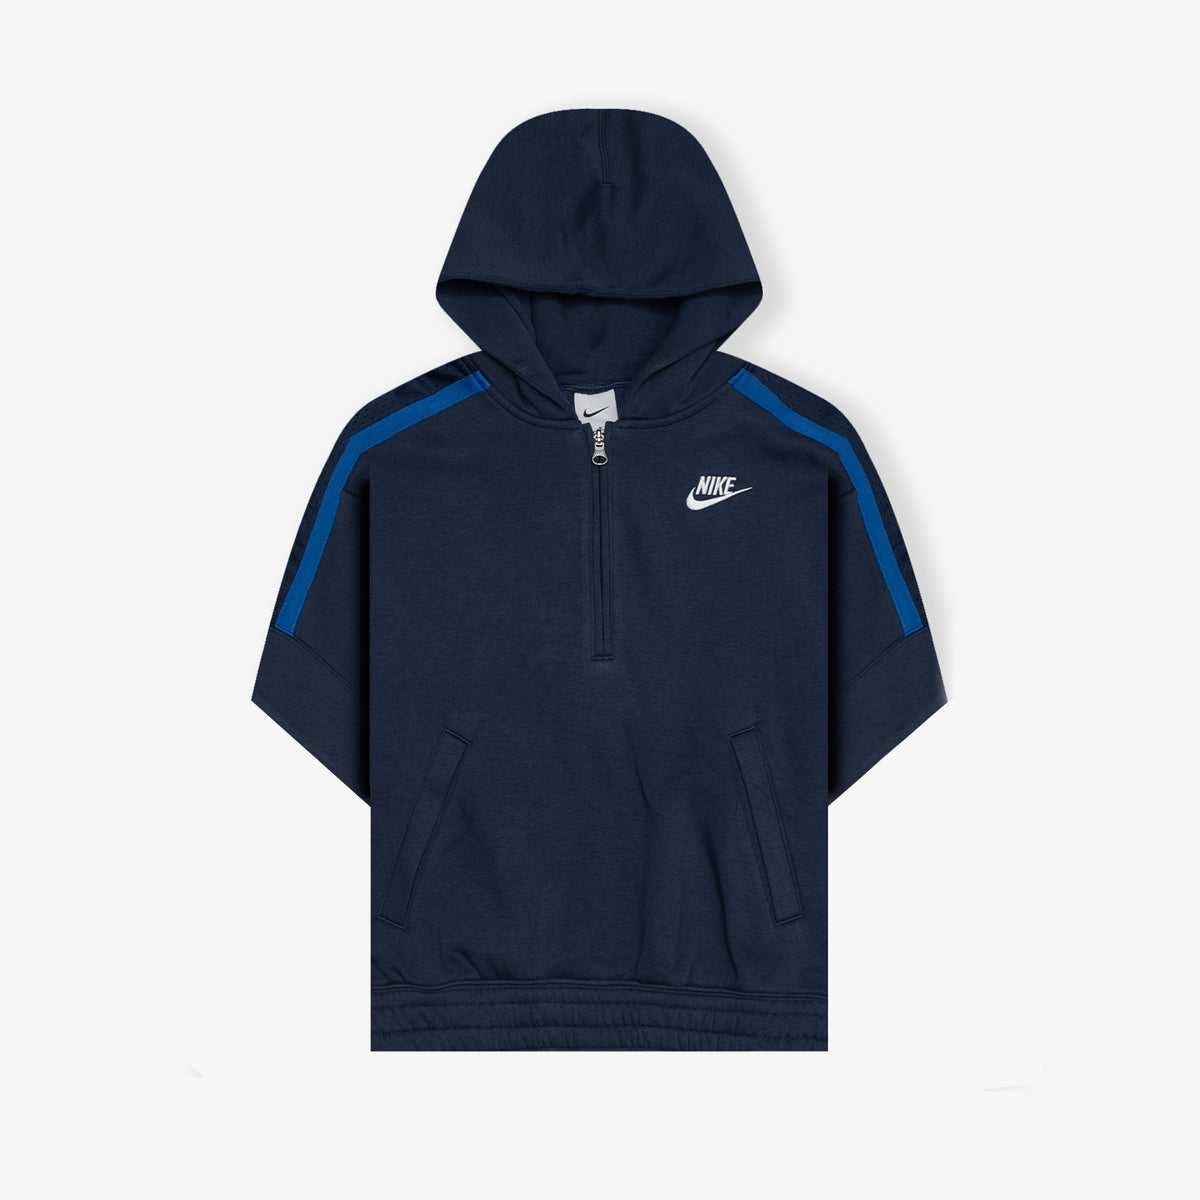 Culture of Basketball Short-Sleeve Youth Hoodie - Navy